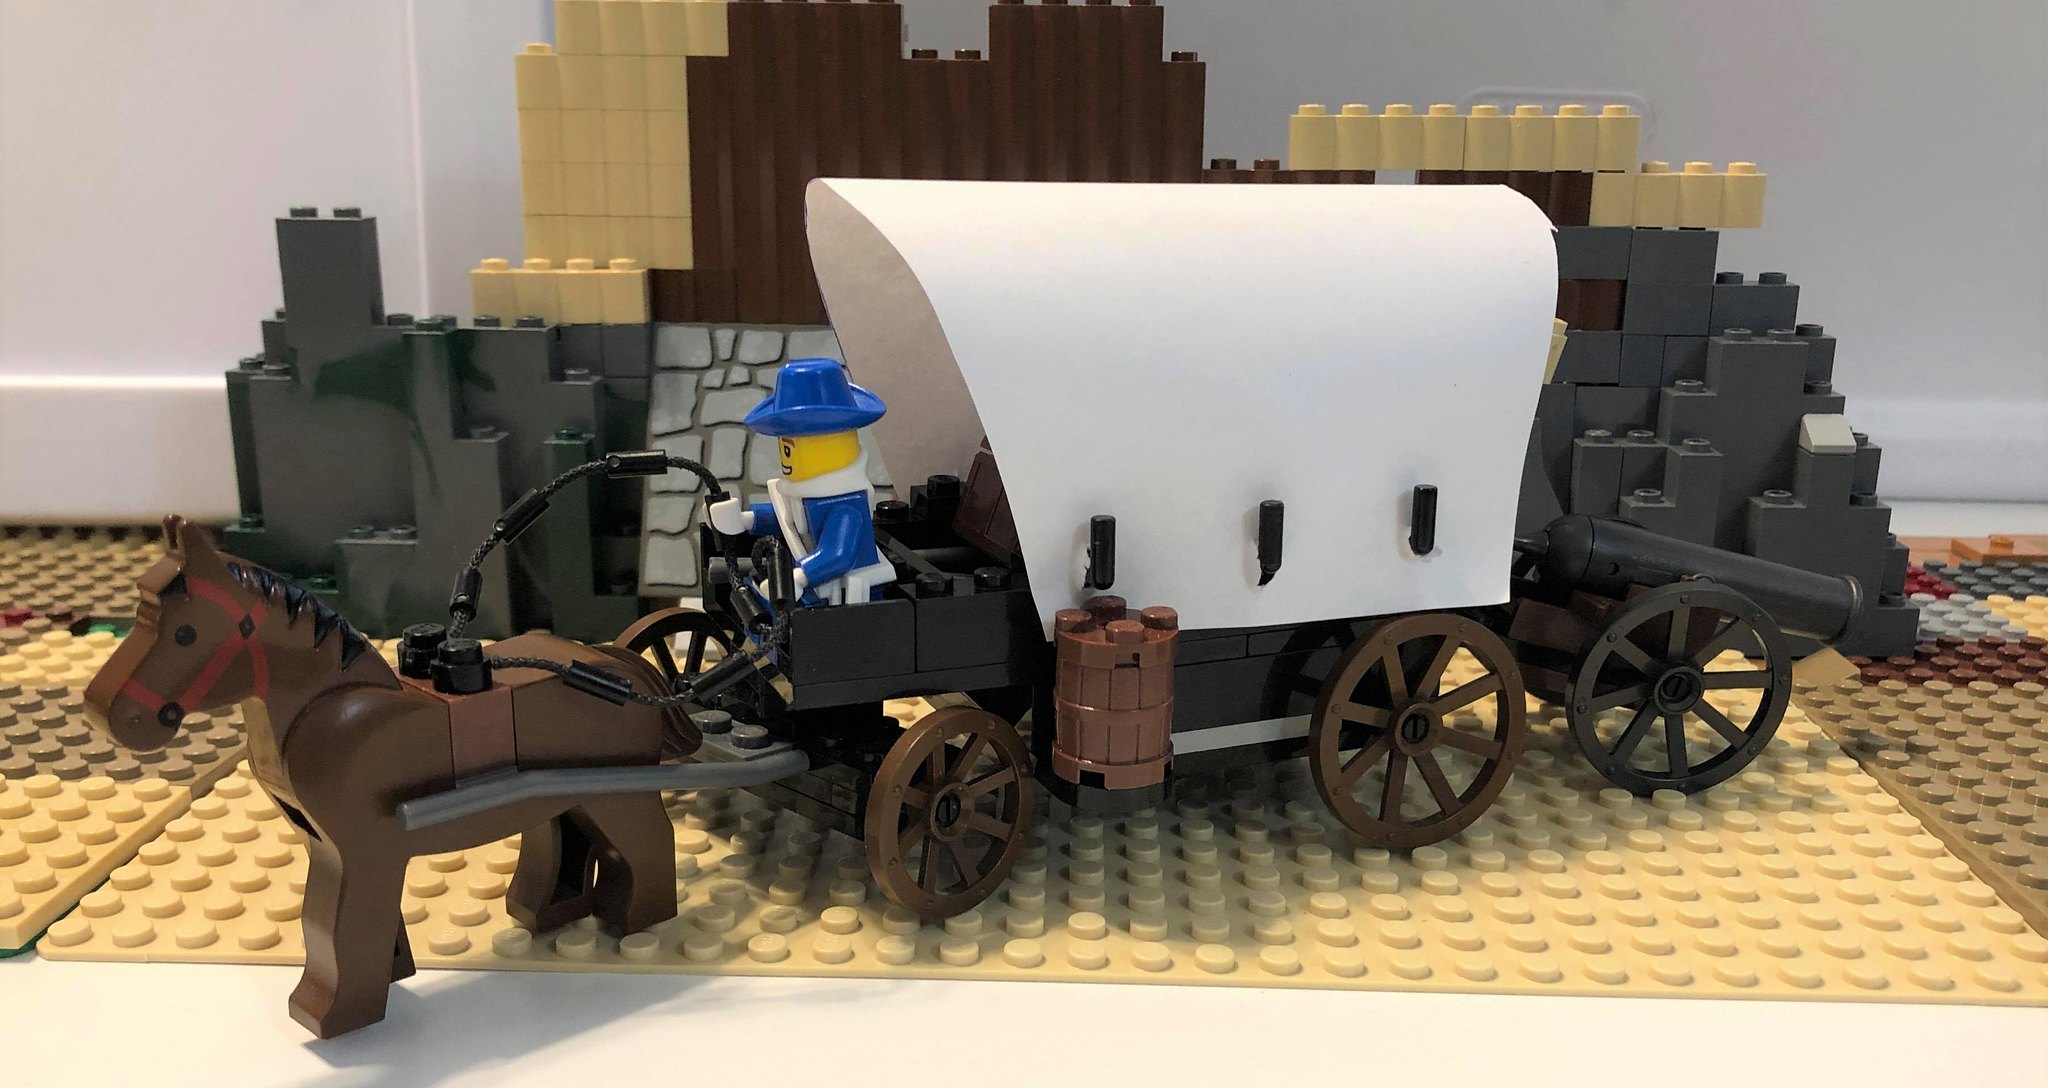 Covered Wagon Based Off Of 6716 Lego Historic Themes Eurobricks Forums